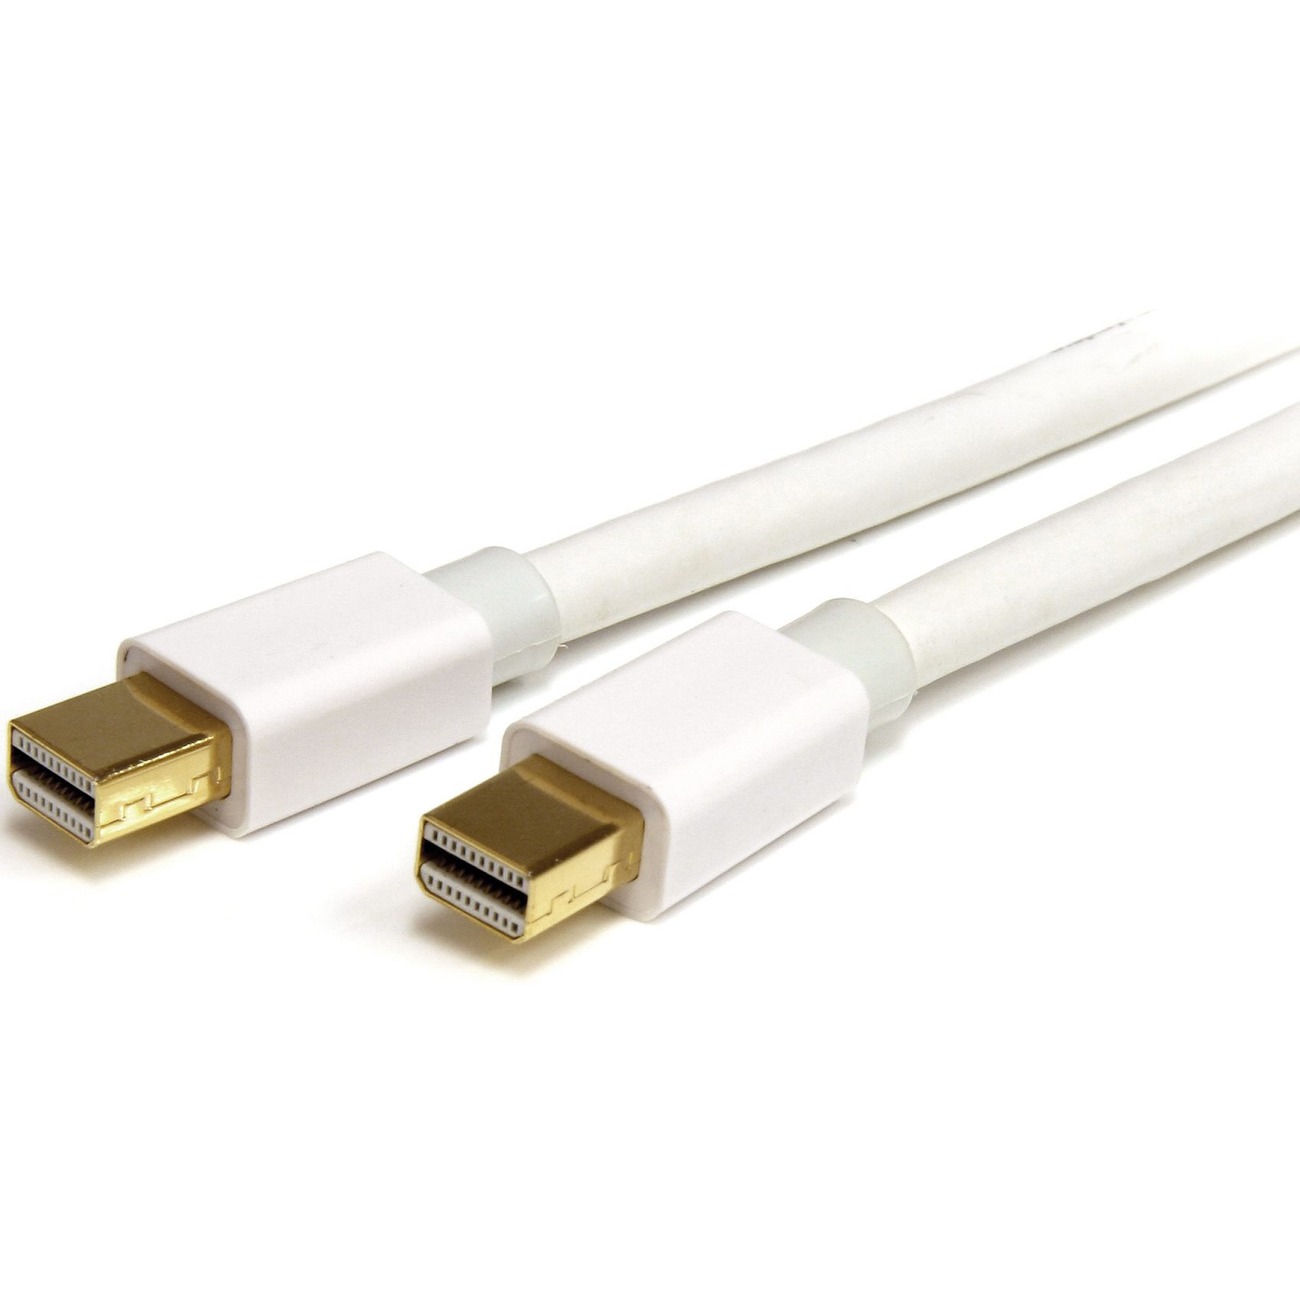 Cable HDMI 2.0 (Male - Male) 4K 2m. - Approx